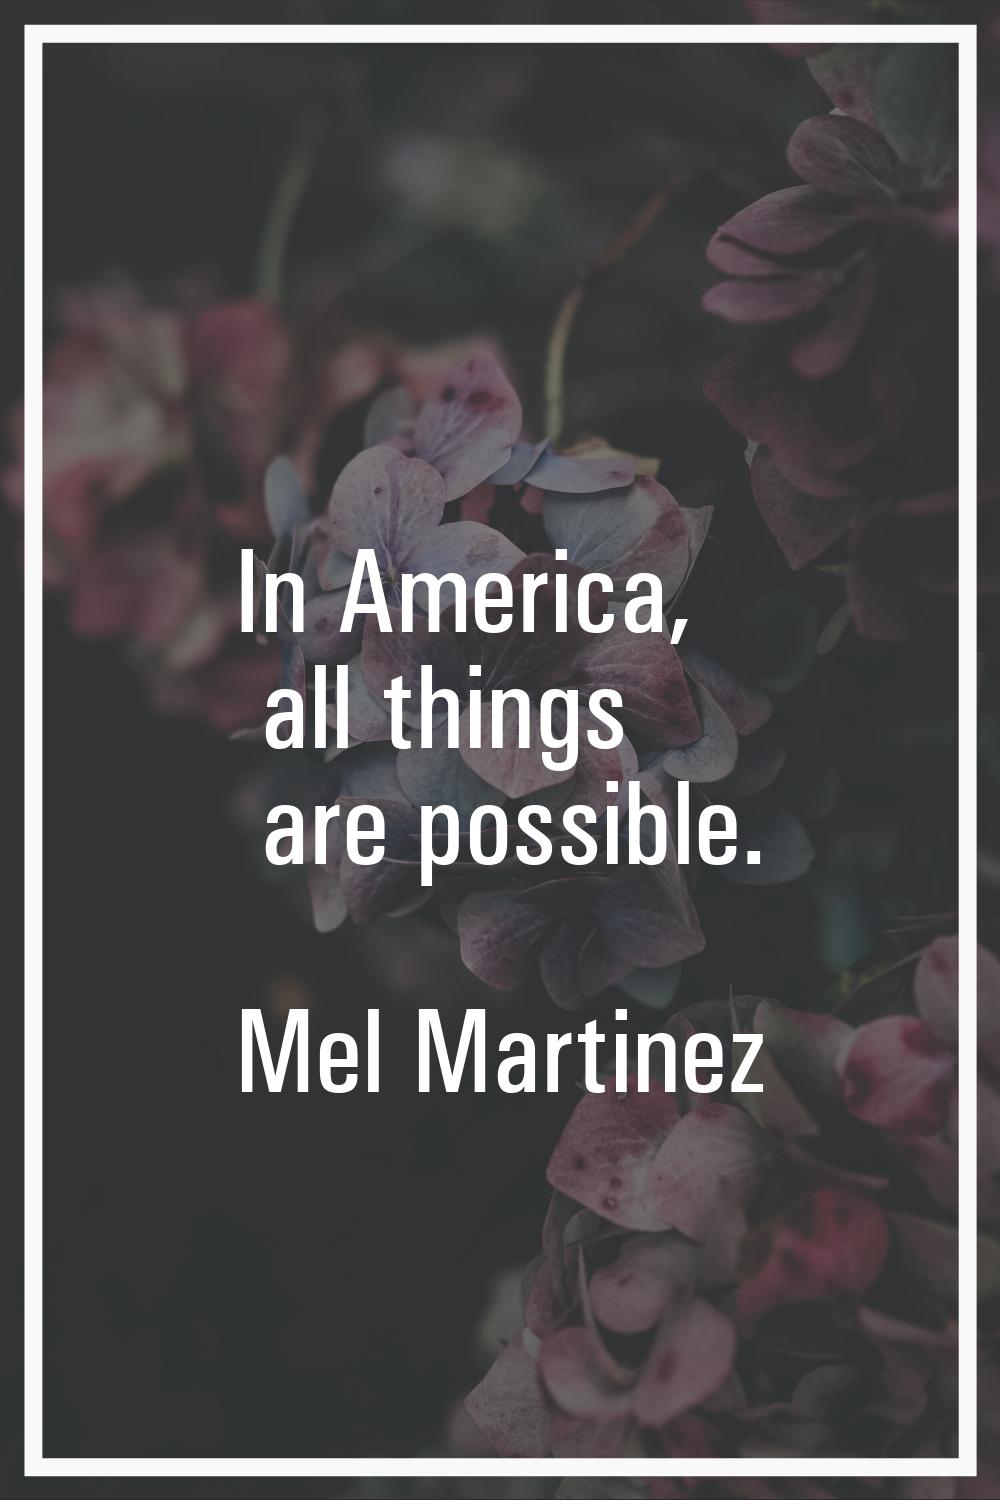 In America, all things are possible.